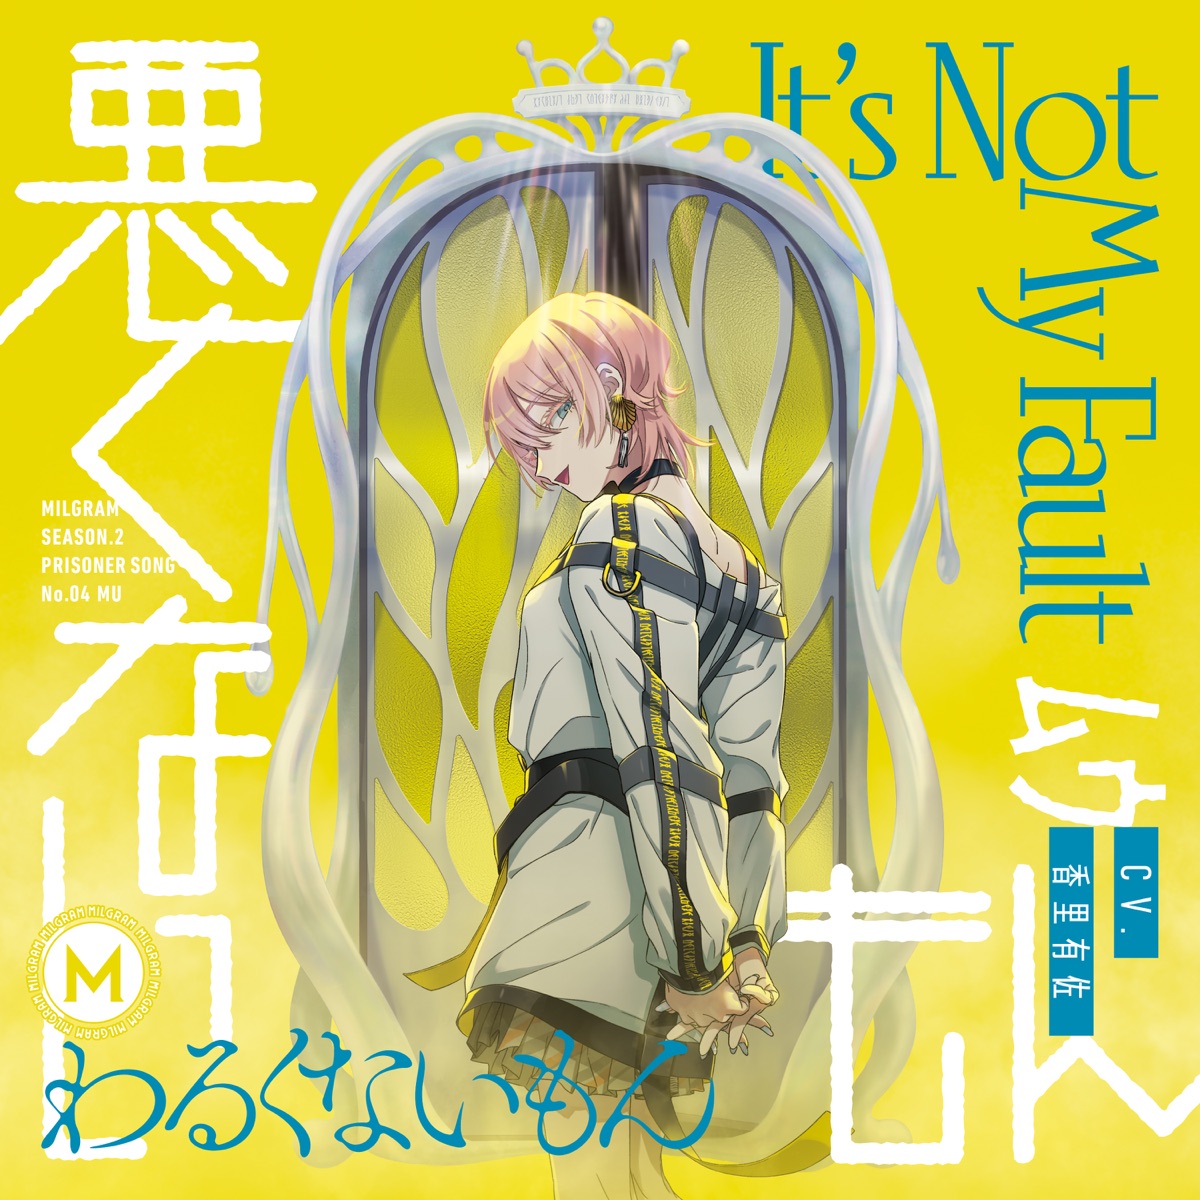 Cover art for『MILGRAM MU (Arisa Kori) - It’s Not My Fault』from the release『It’s Not My Fault』